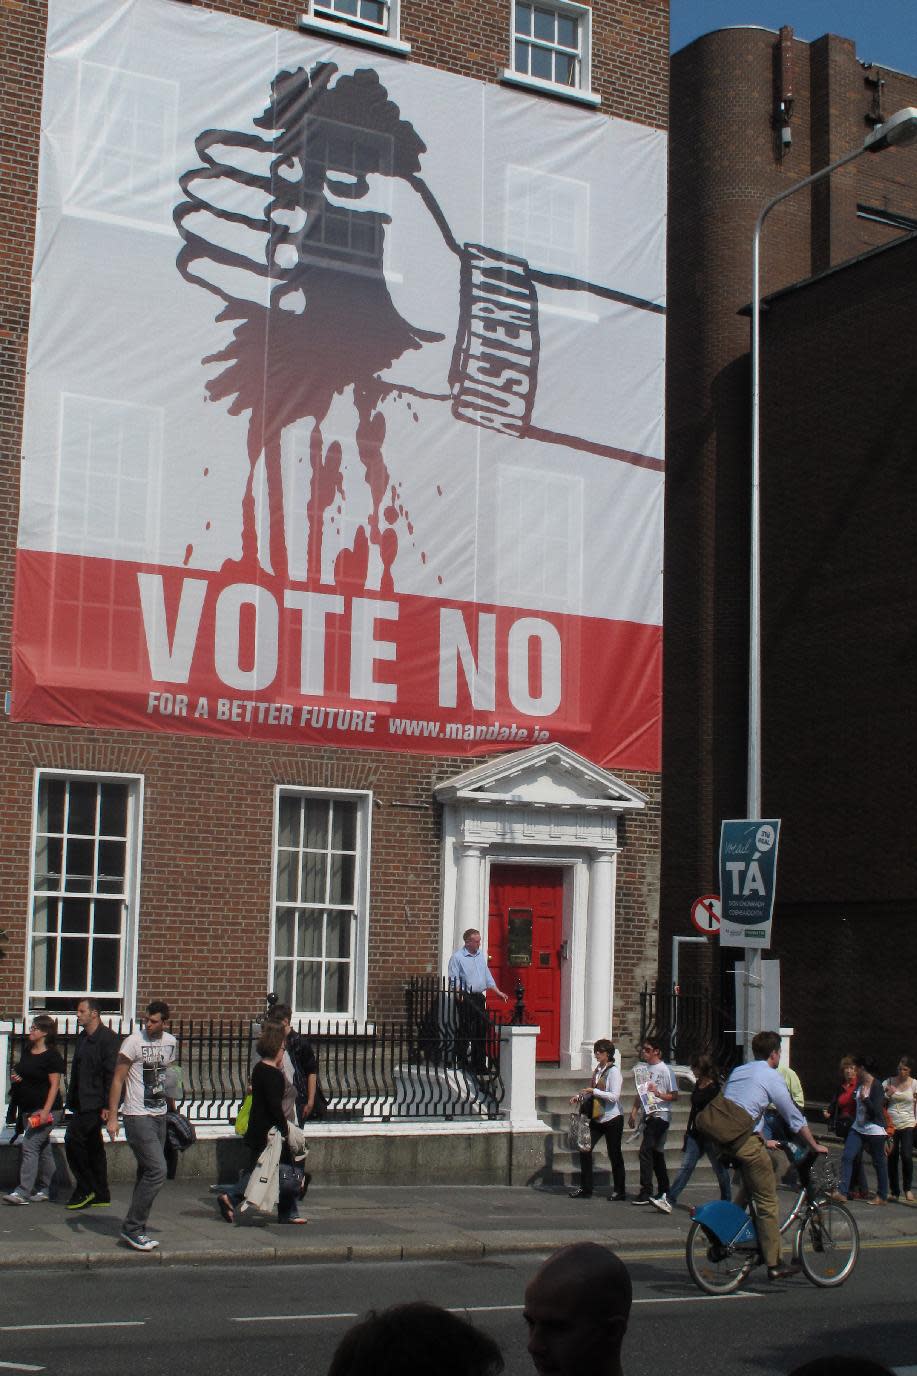 A huge banner depicting Ireland being bled dry by austerity calls for a "no" vote to the European Union's fiscal treaty in Dublin, Ireland, on Friday, May 25, 2012. A much smaller placard, lower right, appeals for ``ta'' _ Gaelic for ``yes.'' Ireland's May 31 referendum represents the only popular test of public support for the treaty, which is designed to restrict the ability of eurozone members to run up deficits. Prime Minister Enda Kenny made a televised appeal to his nation Sunday to support the treaty, arguing it would reassure the world that Ireland is serious about tackling its deficits and staying in the euro. (AP Photo/Shawn Pogatchnik)